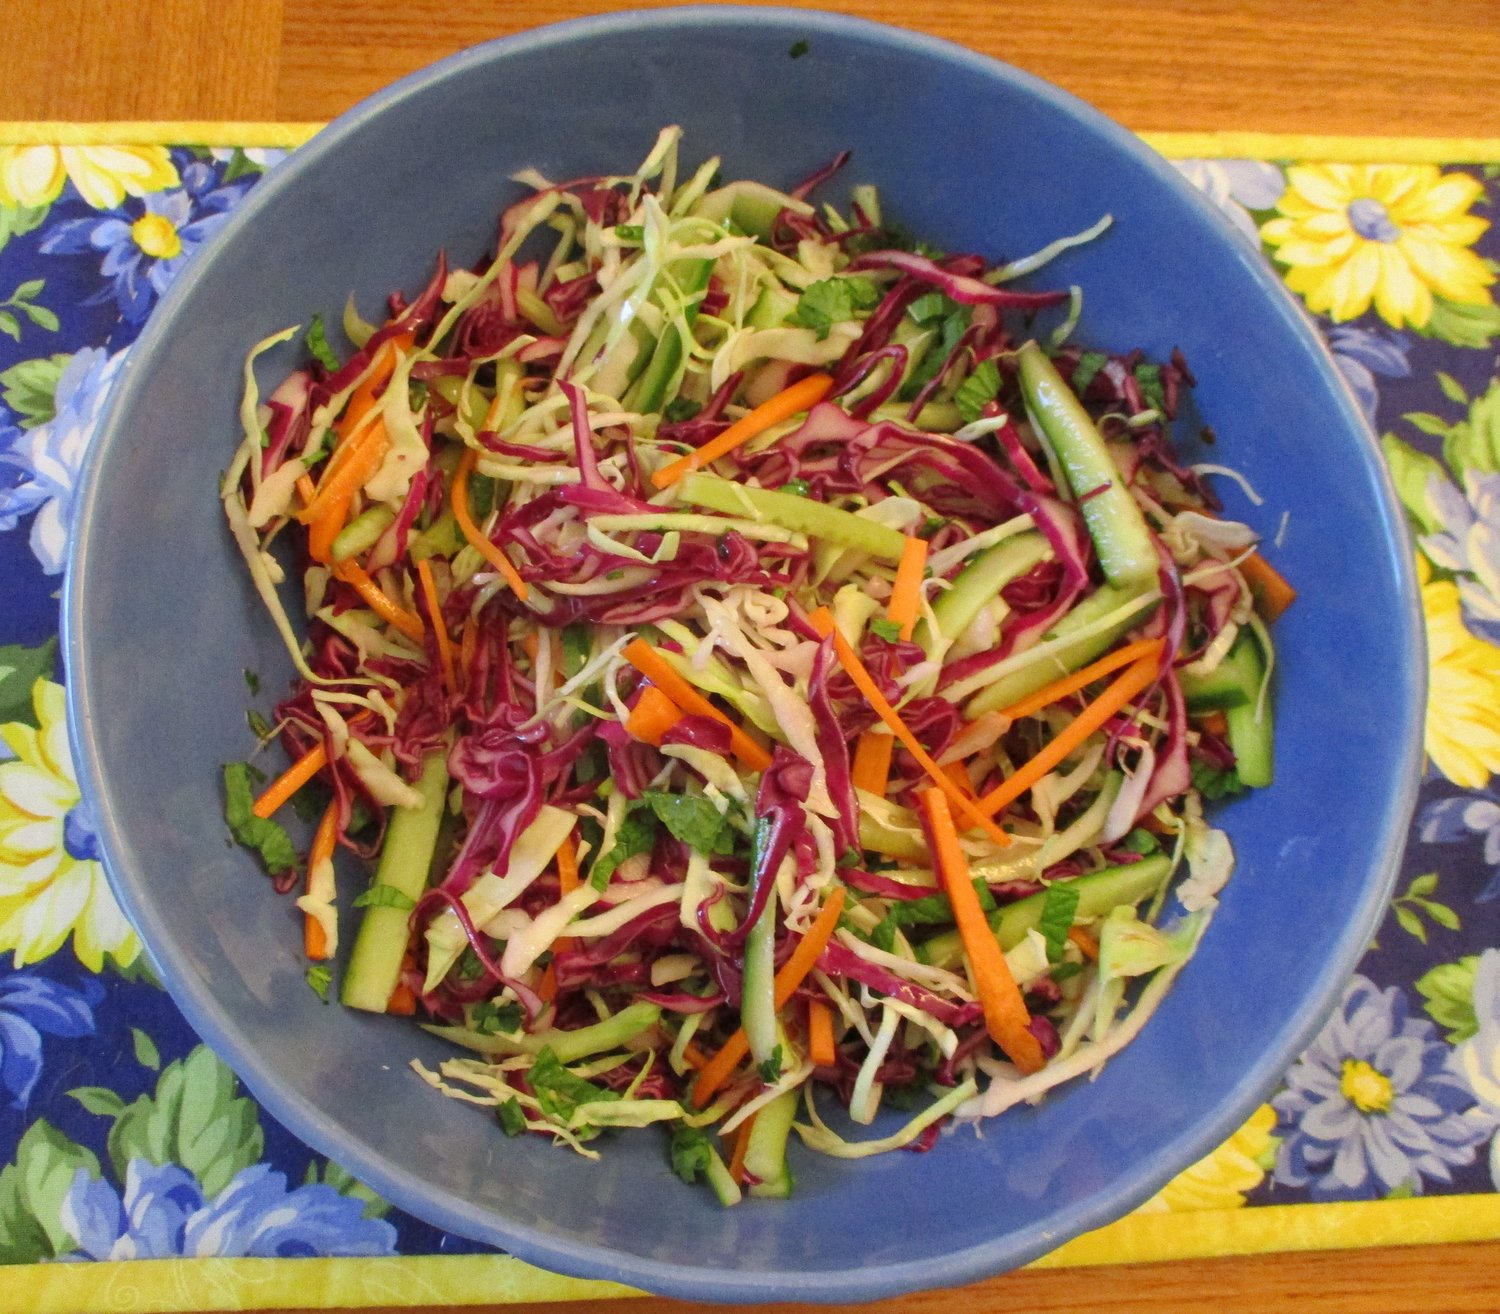 The completed Vietnamese cabbage slaw.